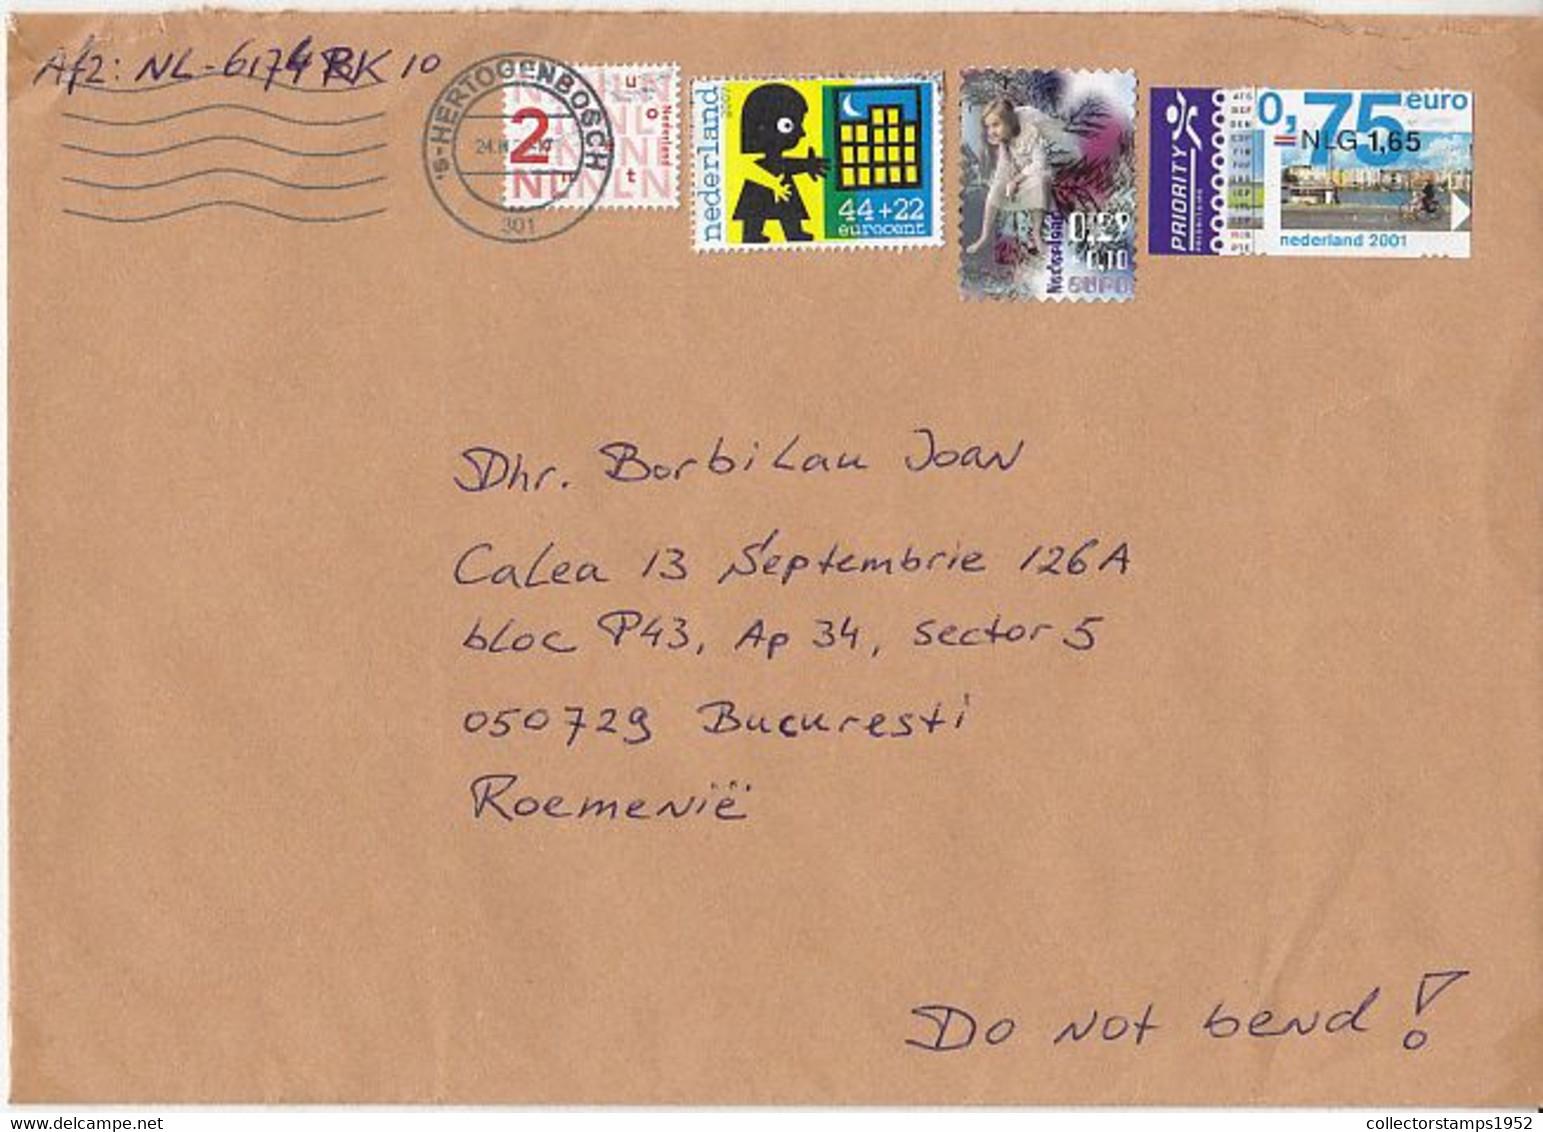 8147FM-SAFE HOUSE, CHRISTMAD, EURO STAMPS ON COVER, 2020, NETHERLANDS - Covers & Documents